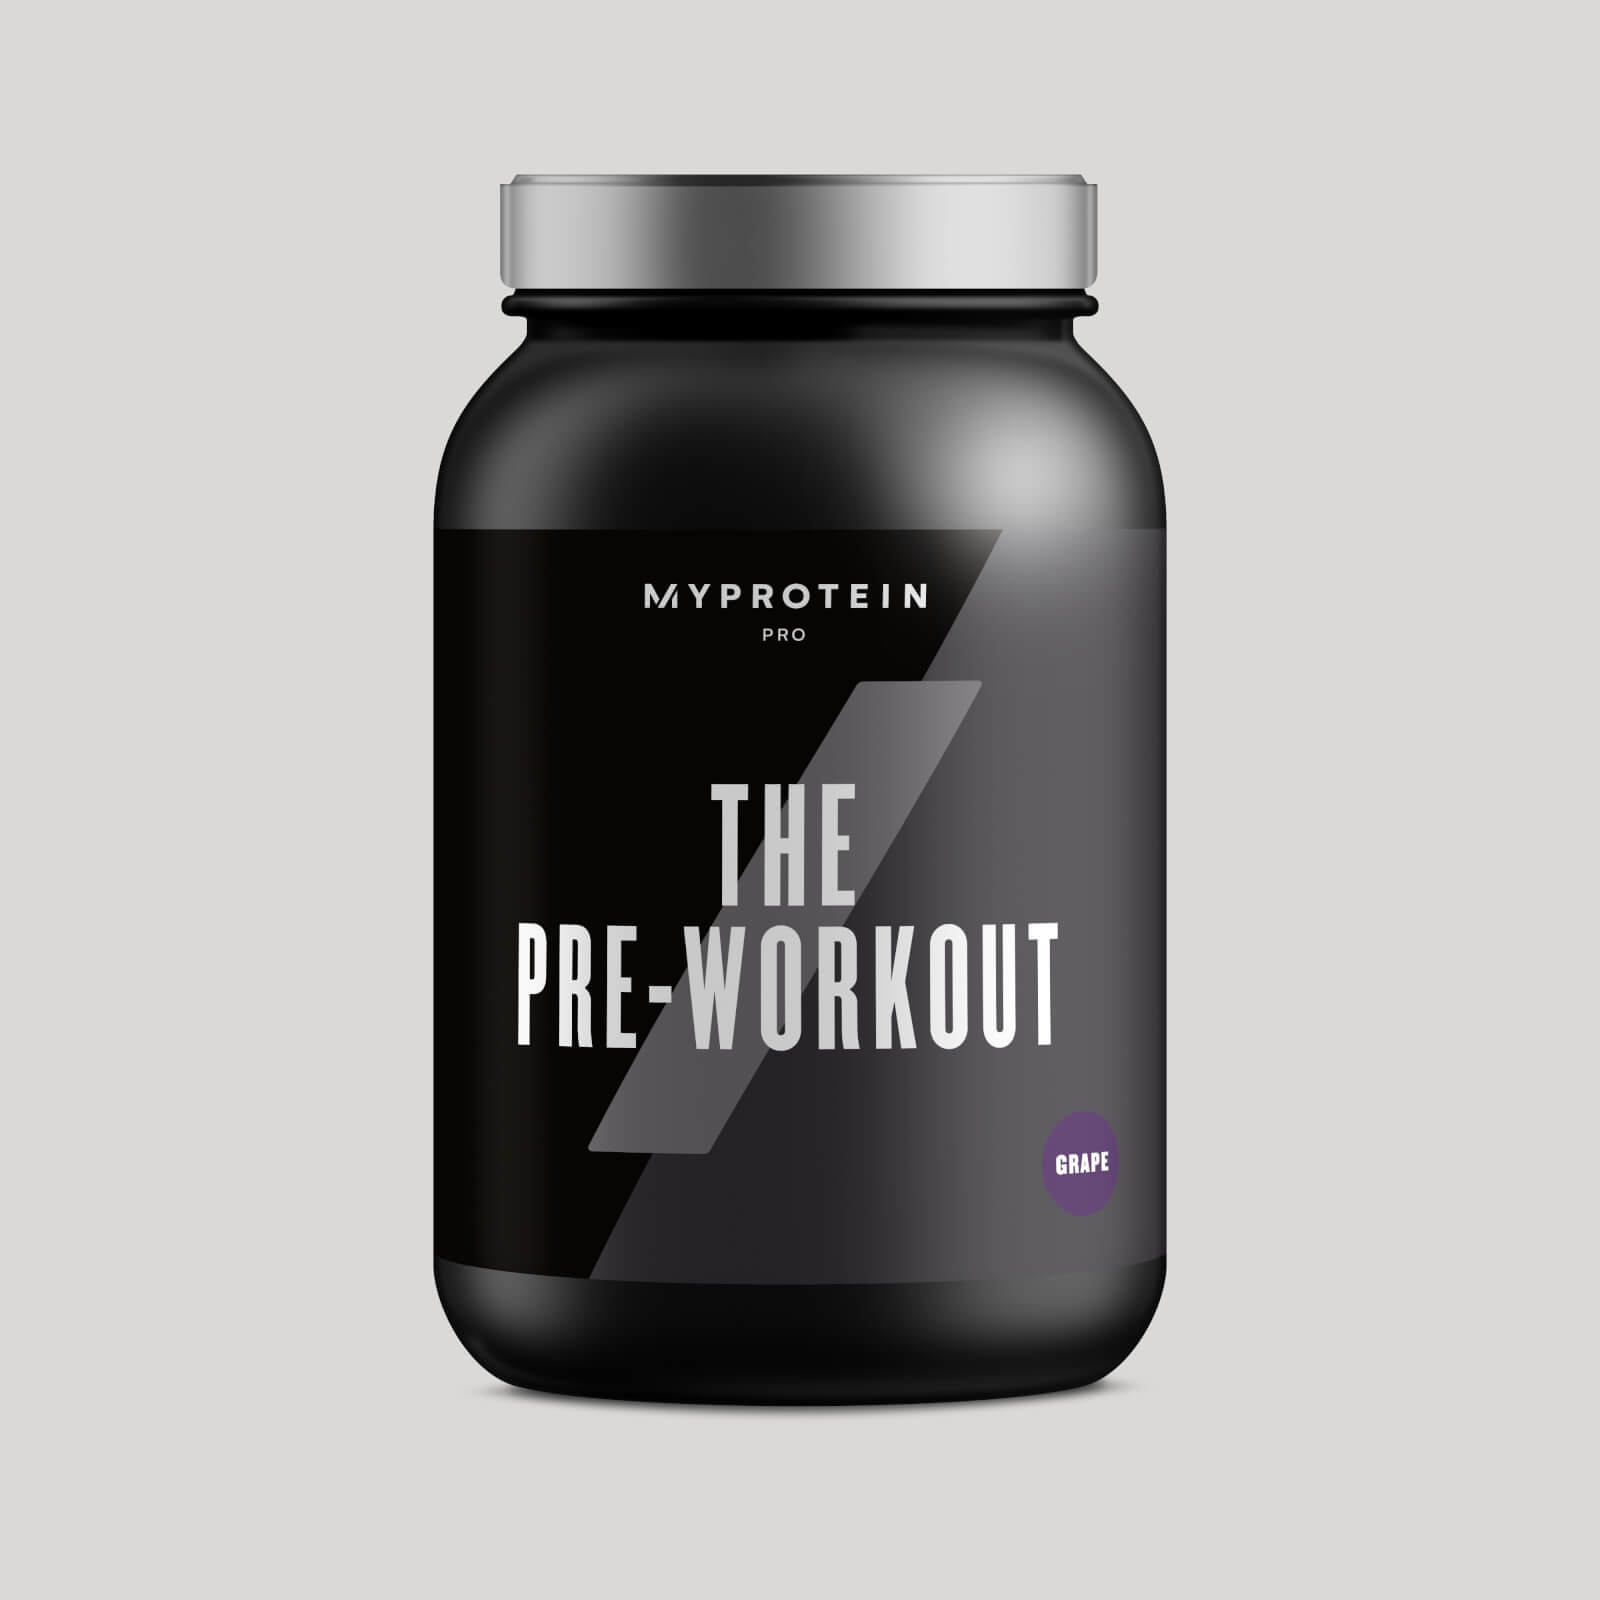 Myprotein THE Pre-Workout - 30servings - Grape